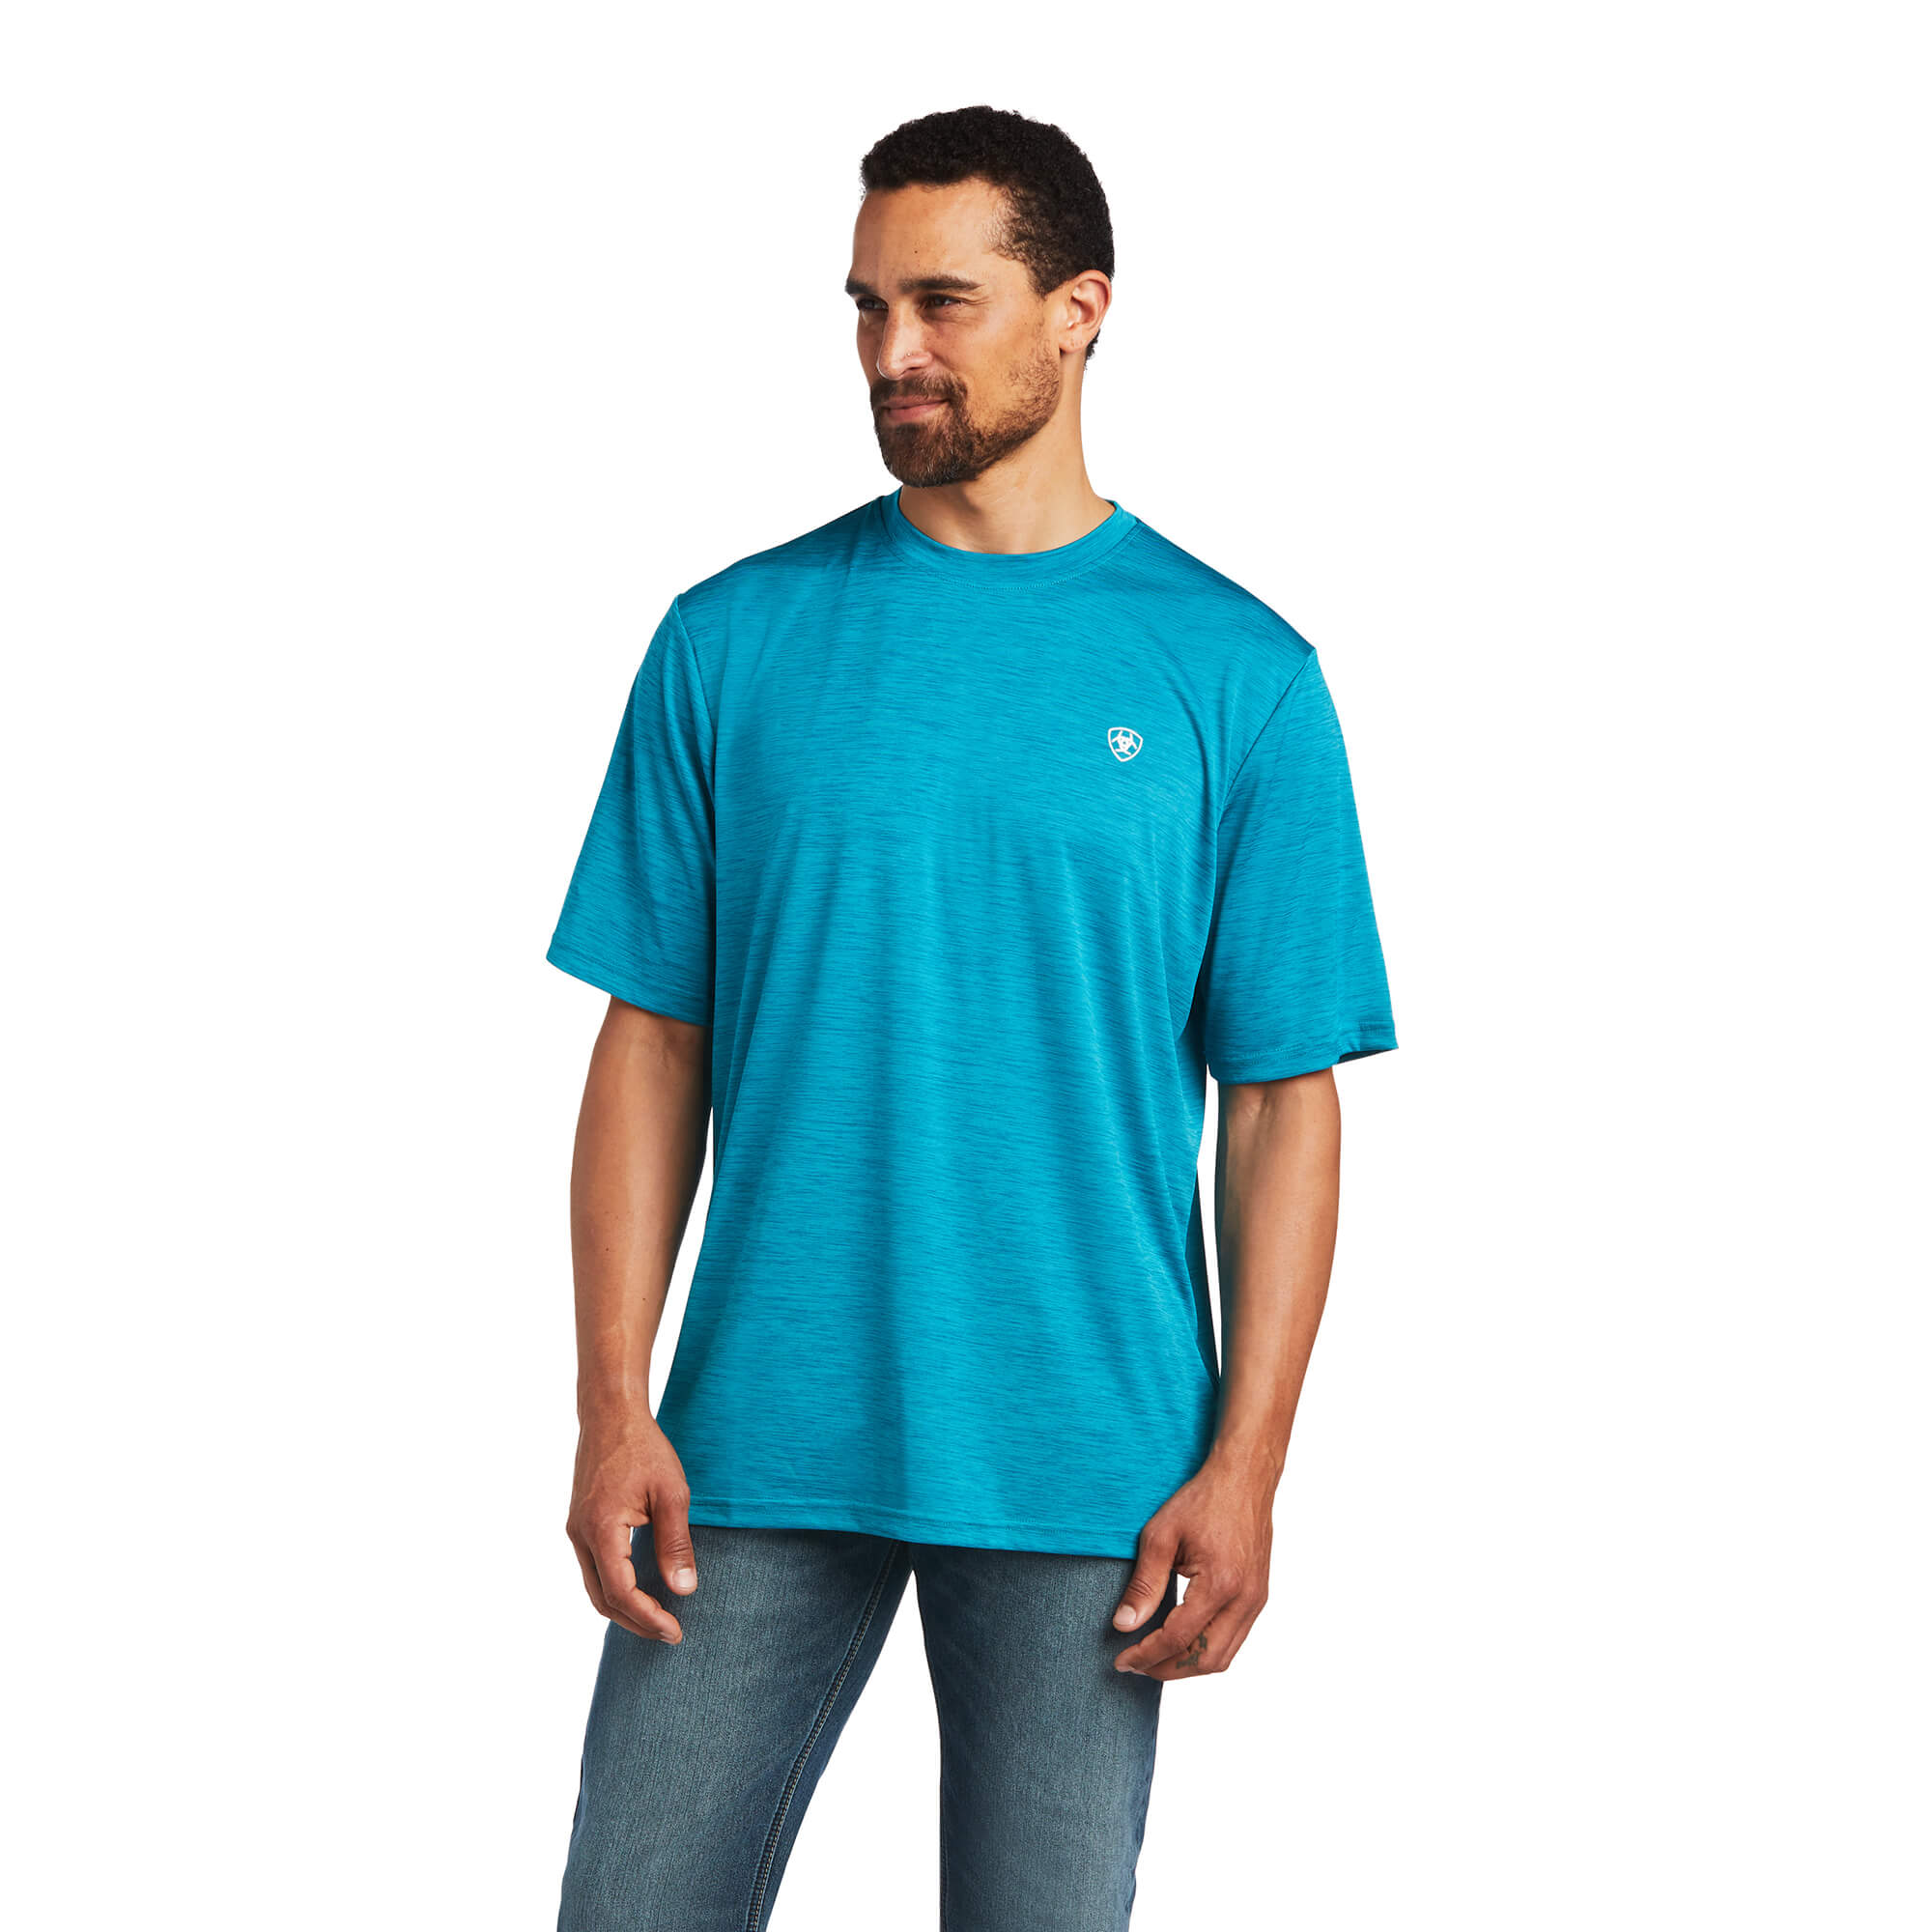 Charger Basic T-Shirt-Young Turquoise